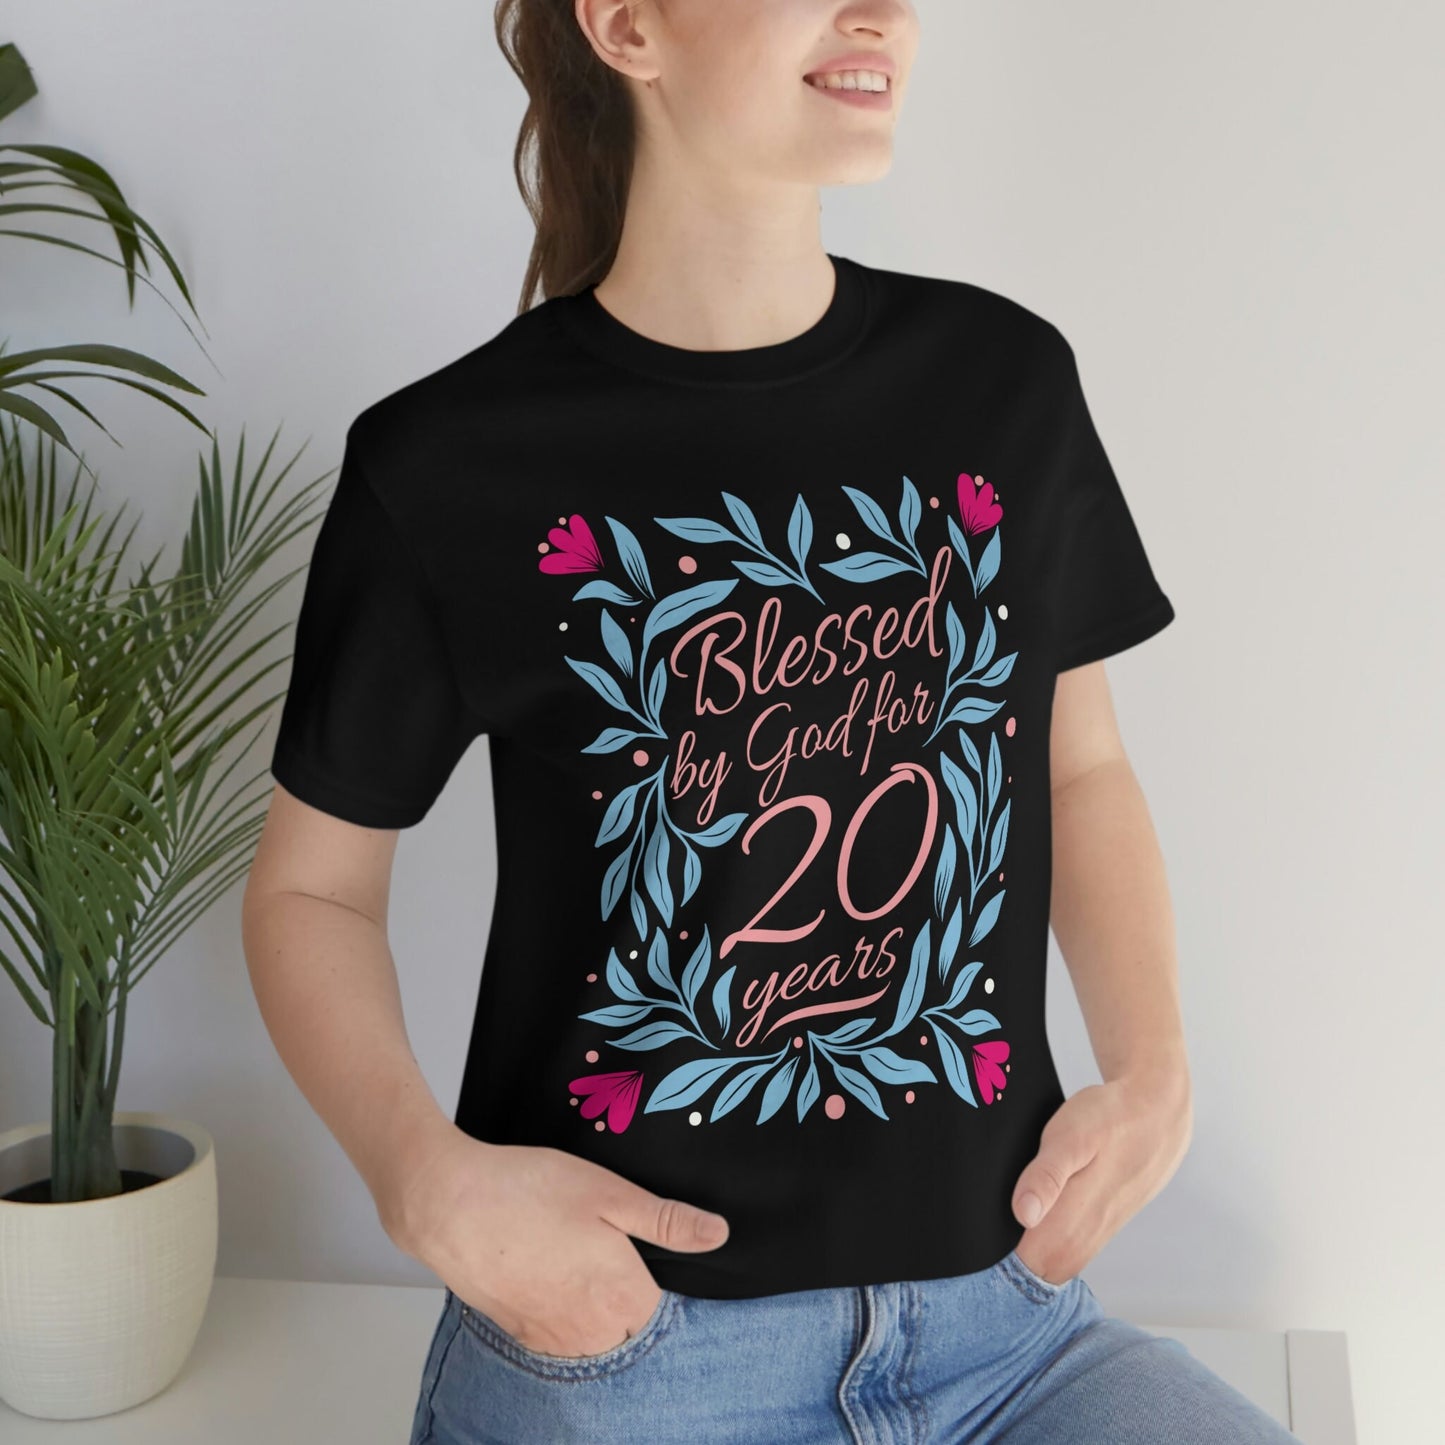 Blessed by God for 20 years gift t-shirt for daughter or niece